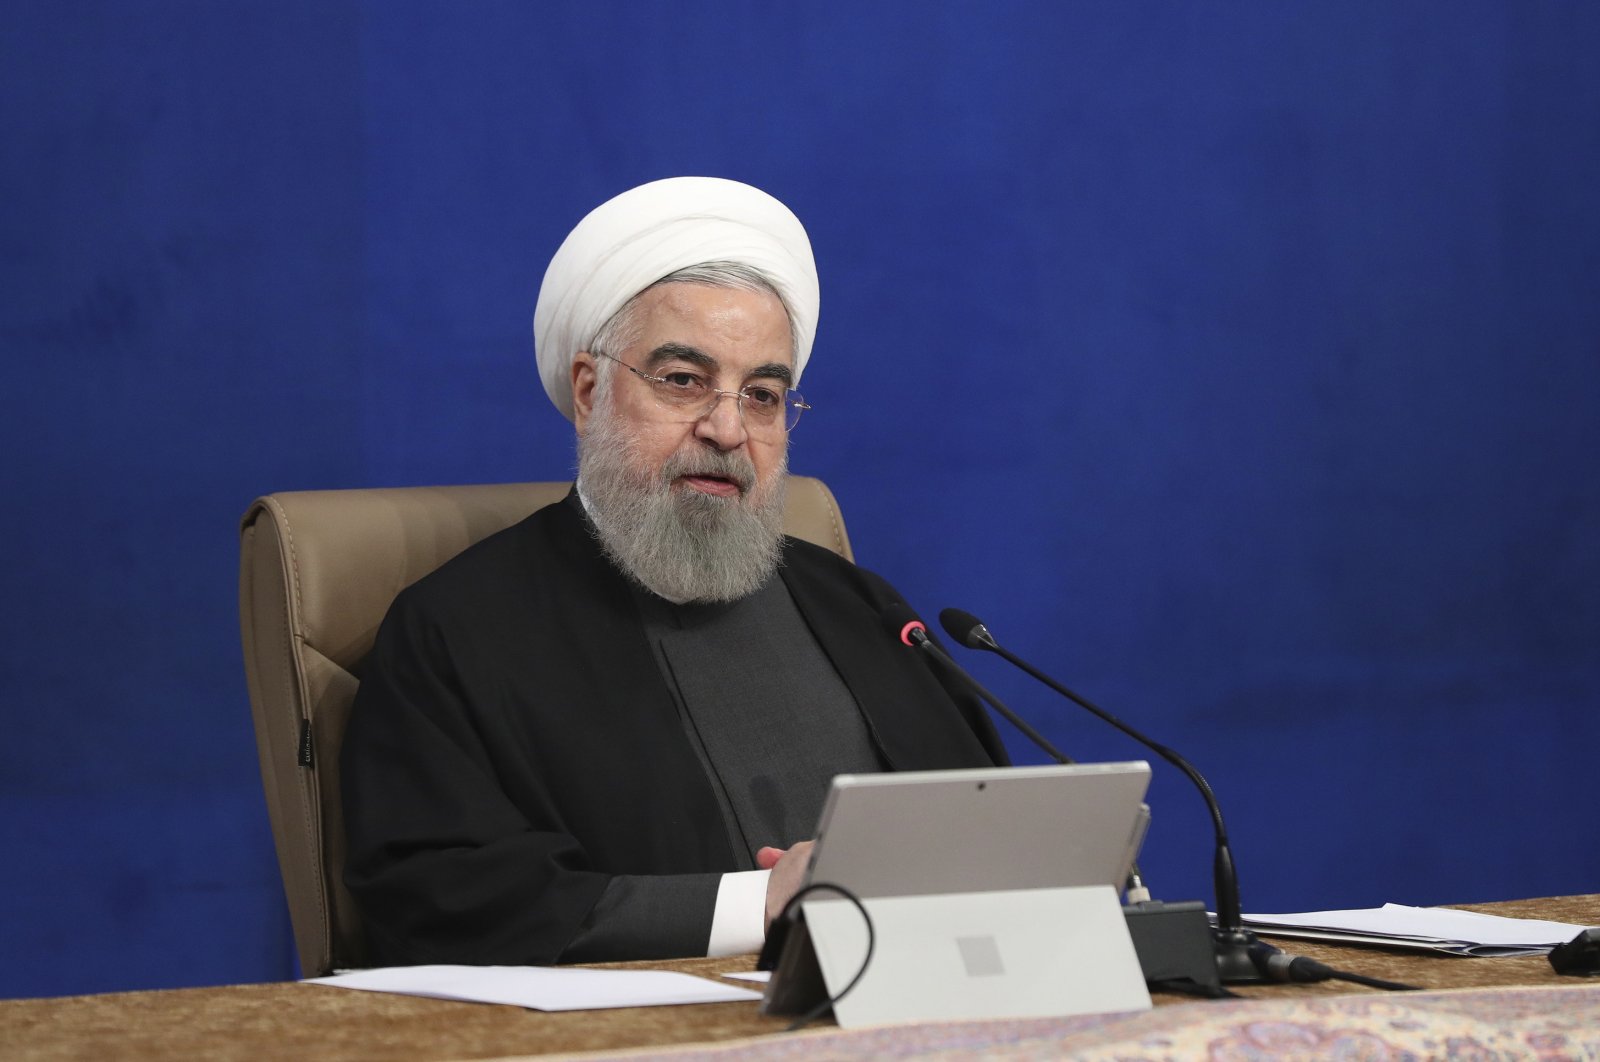 President Hassan Rouhani speaks at a Cabinet meeting in Tehran, Iran, Dec. 16, 2020, in this photo released by the official website of the office of the Iranian Presidency. (AP Photo)